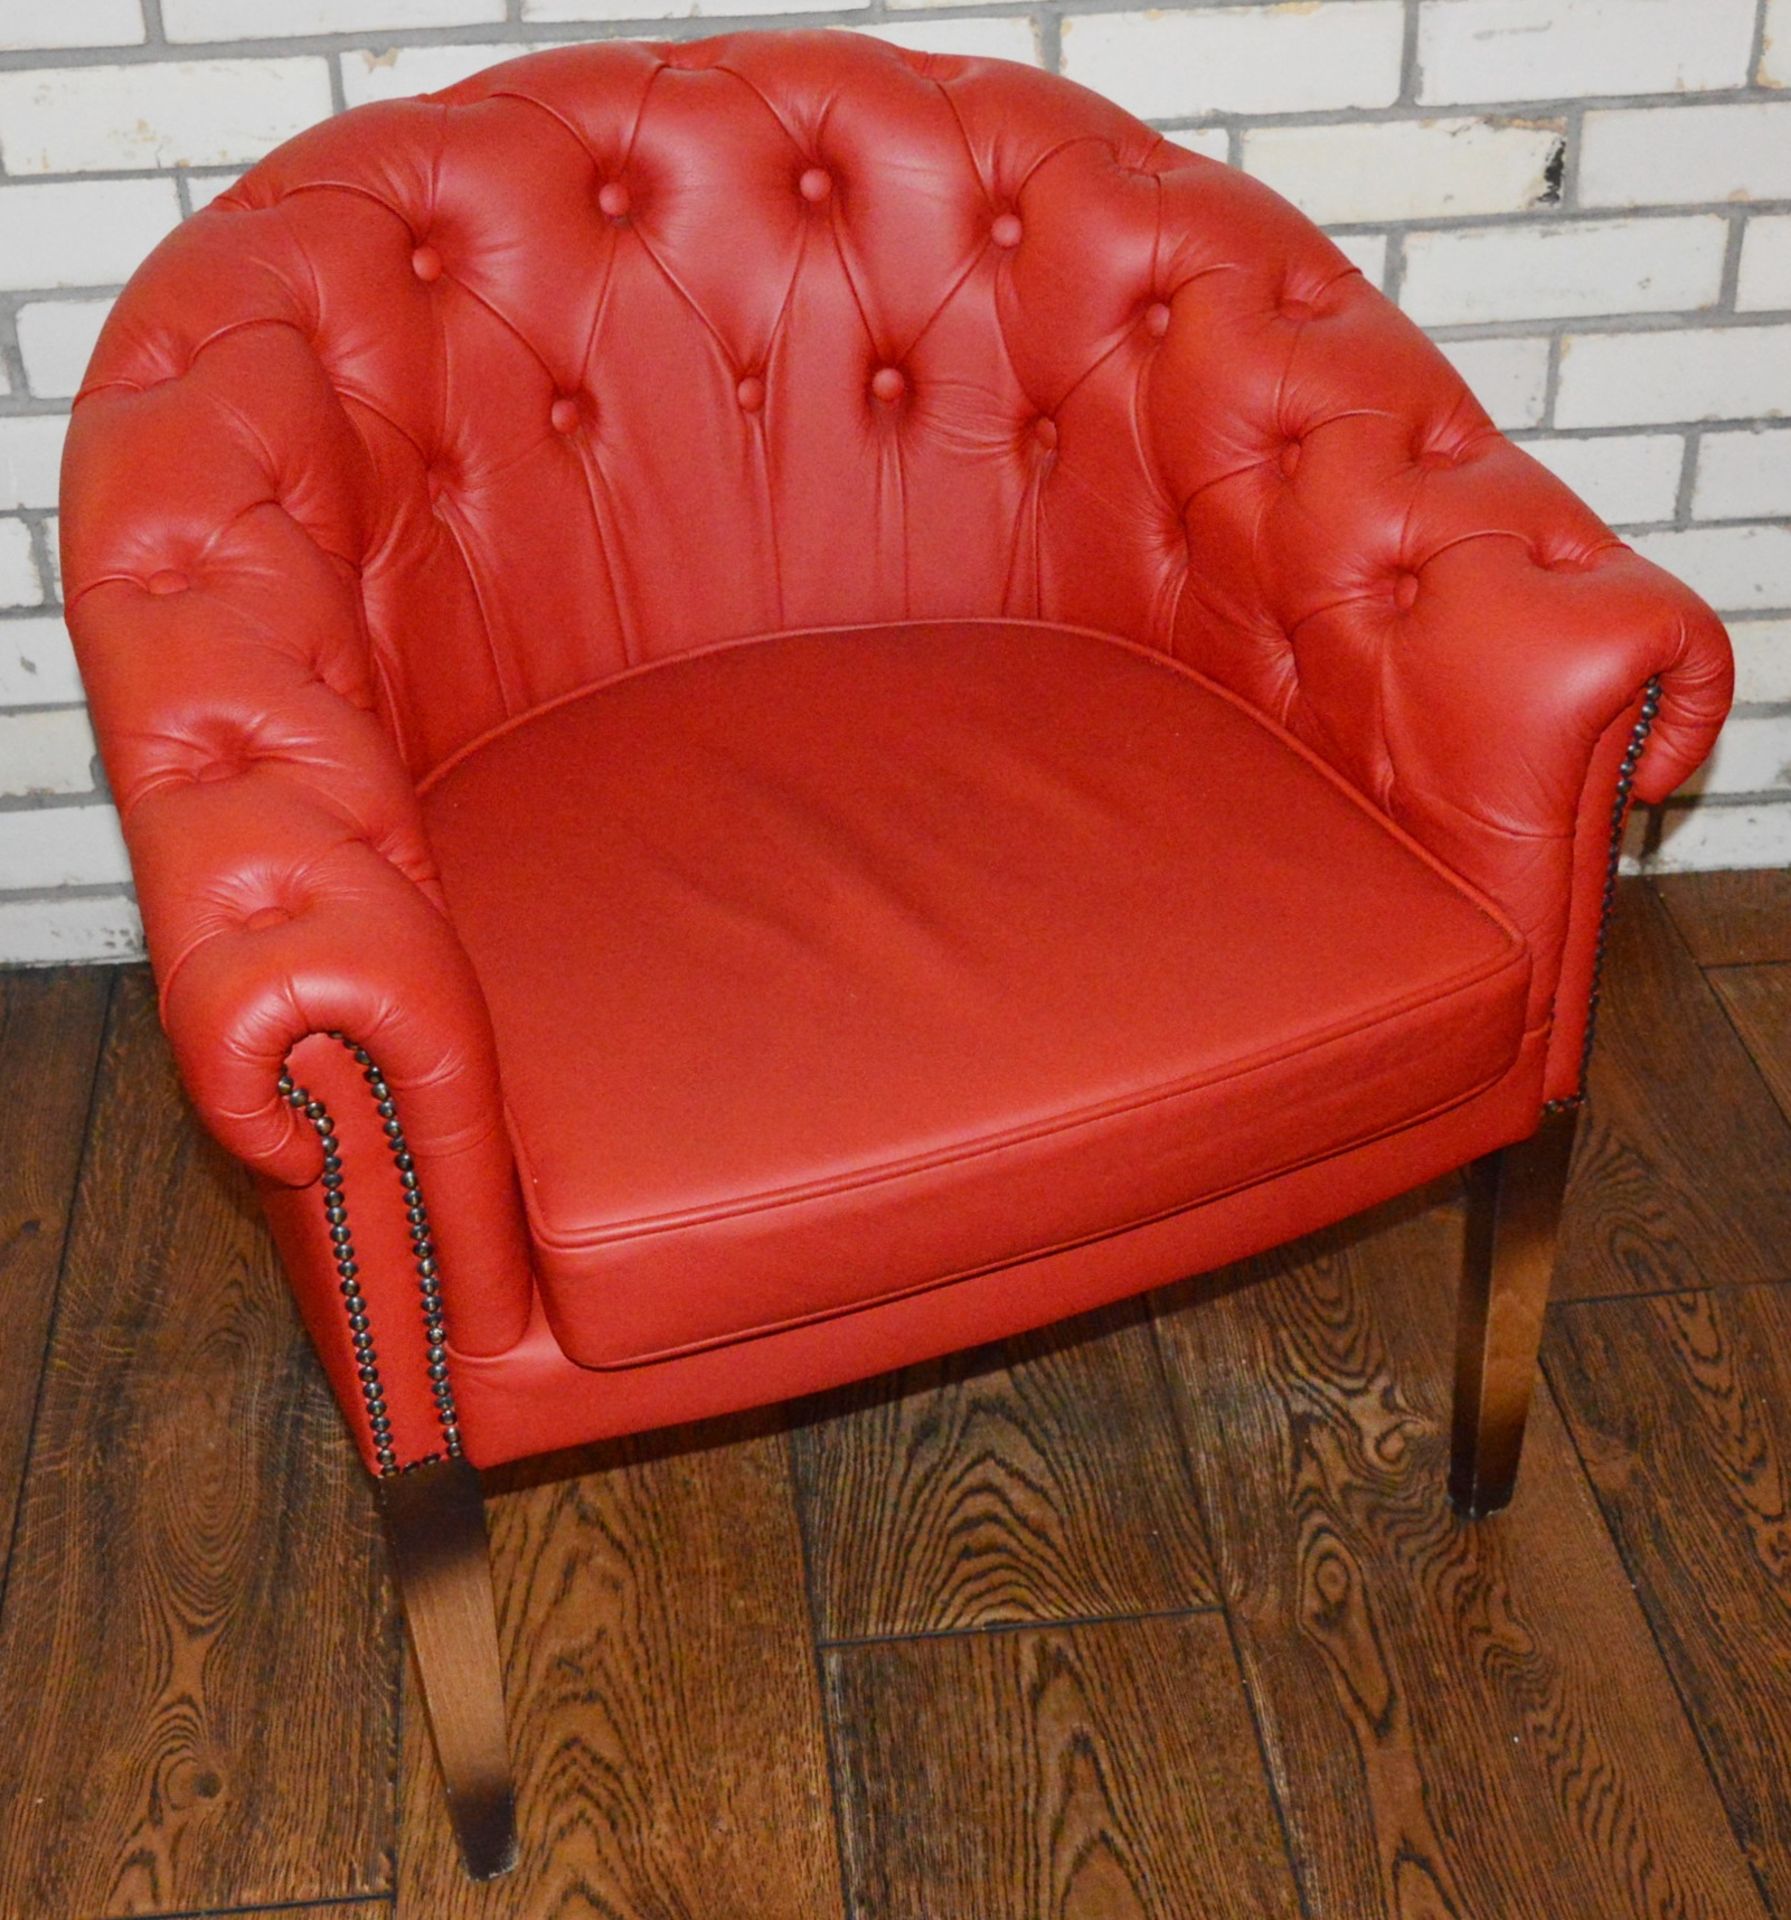 2 x Chesterfield Style Buttoned Back Red Leather Tub Chairs With Hardwood Legs Finished in an - Image 5 of 8